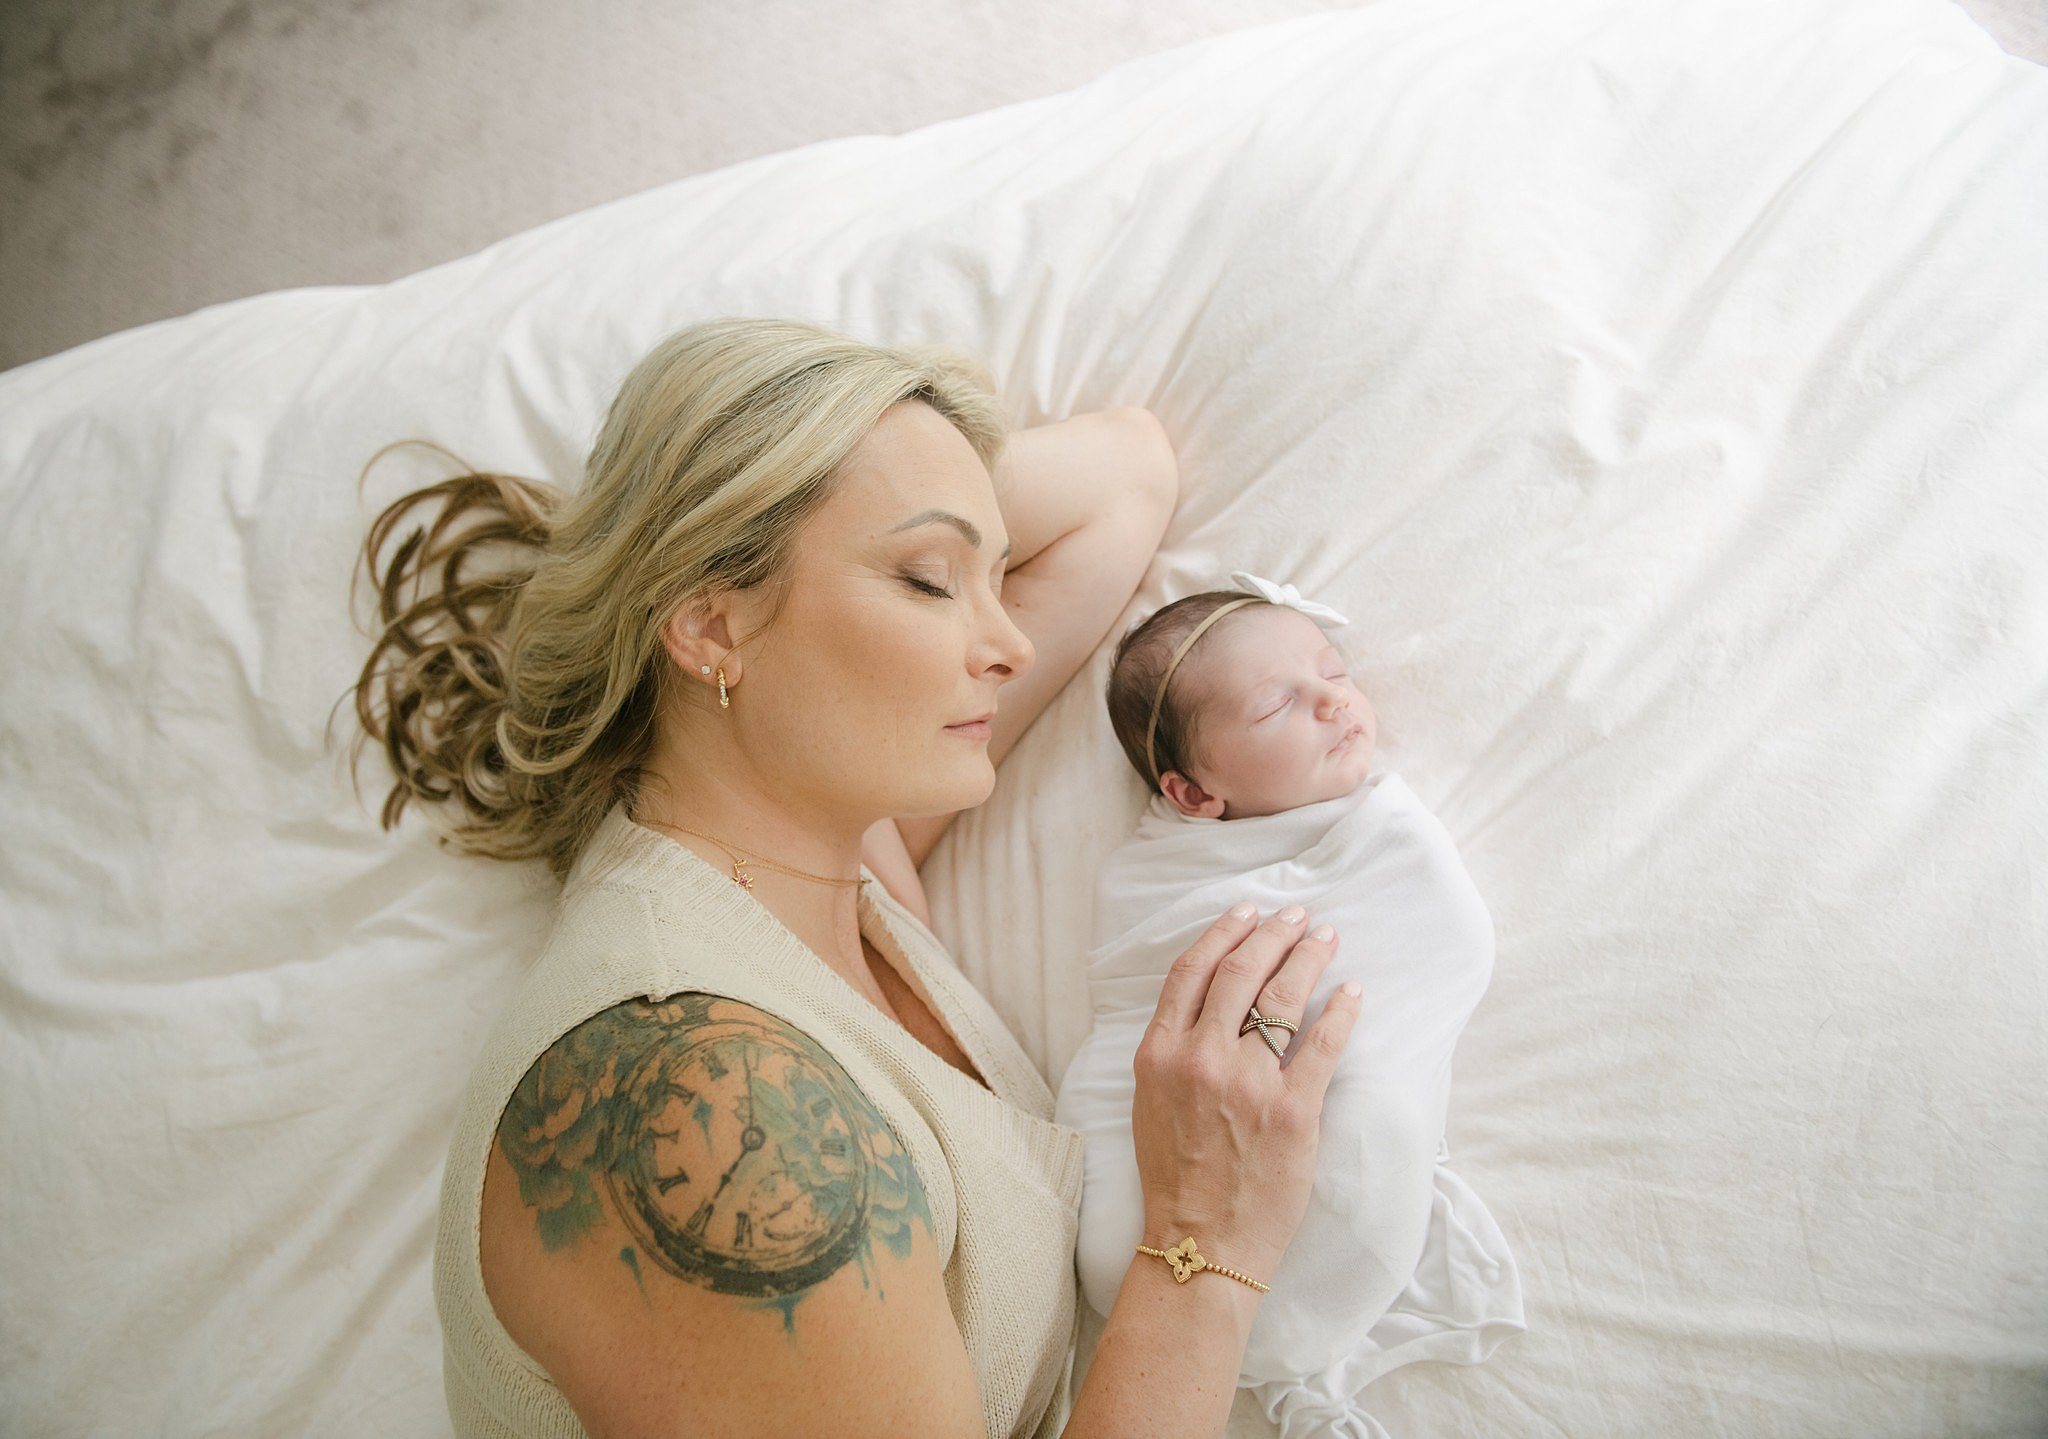 A new mom lays on a bed cuddling with her sleeping newborn daughter